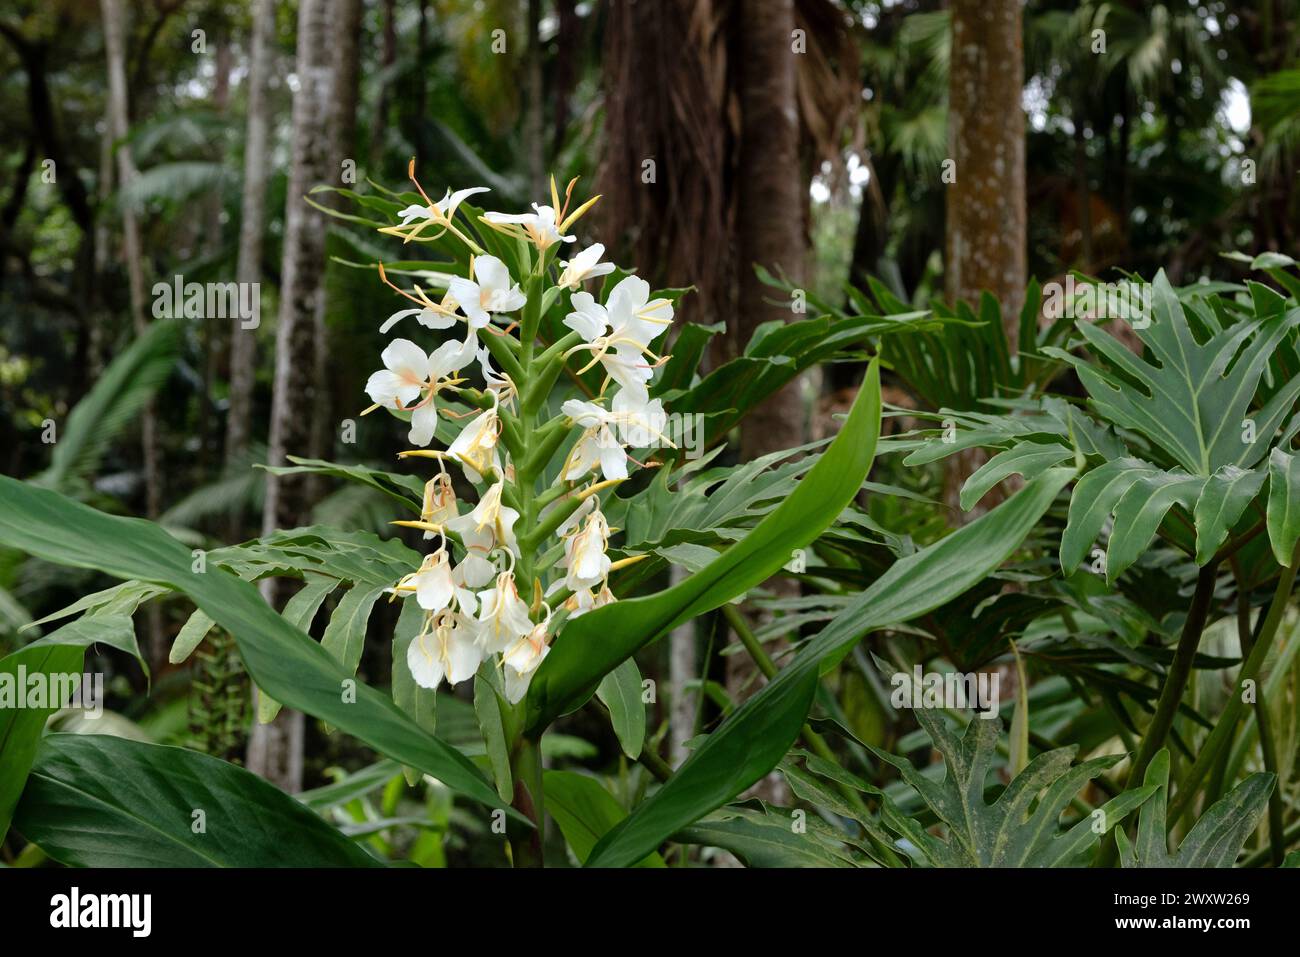 Hedychium coronarium, the white garland-lily or white ginger lily Stock Photo